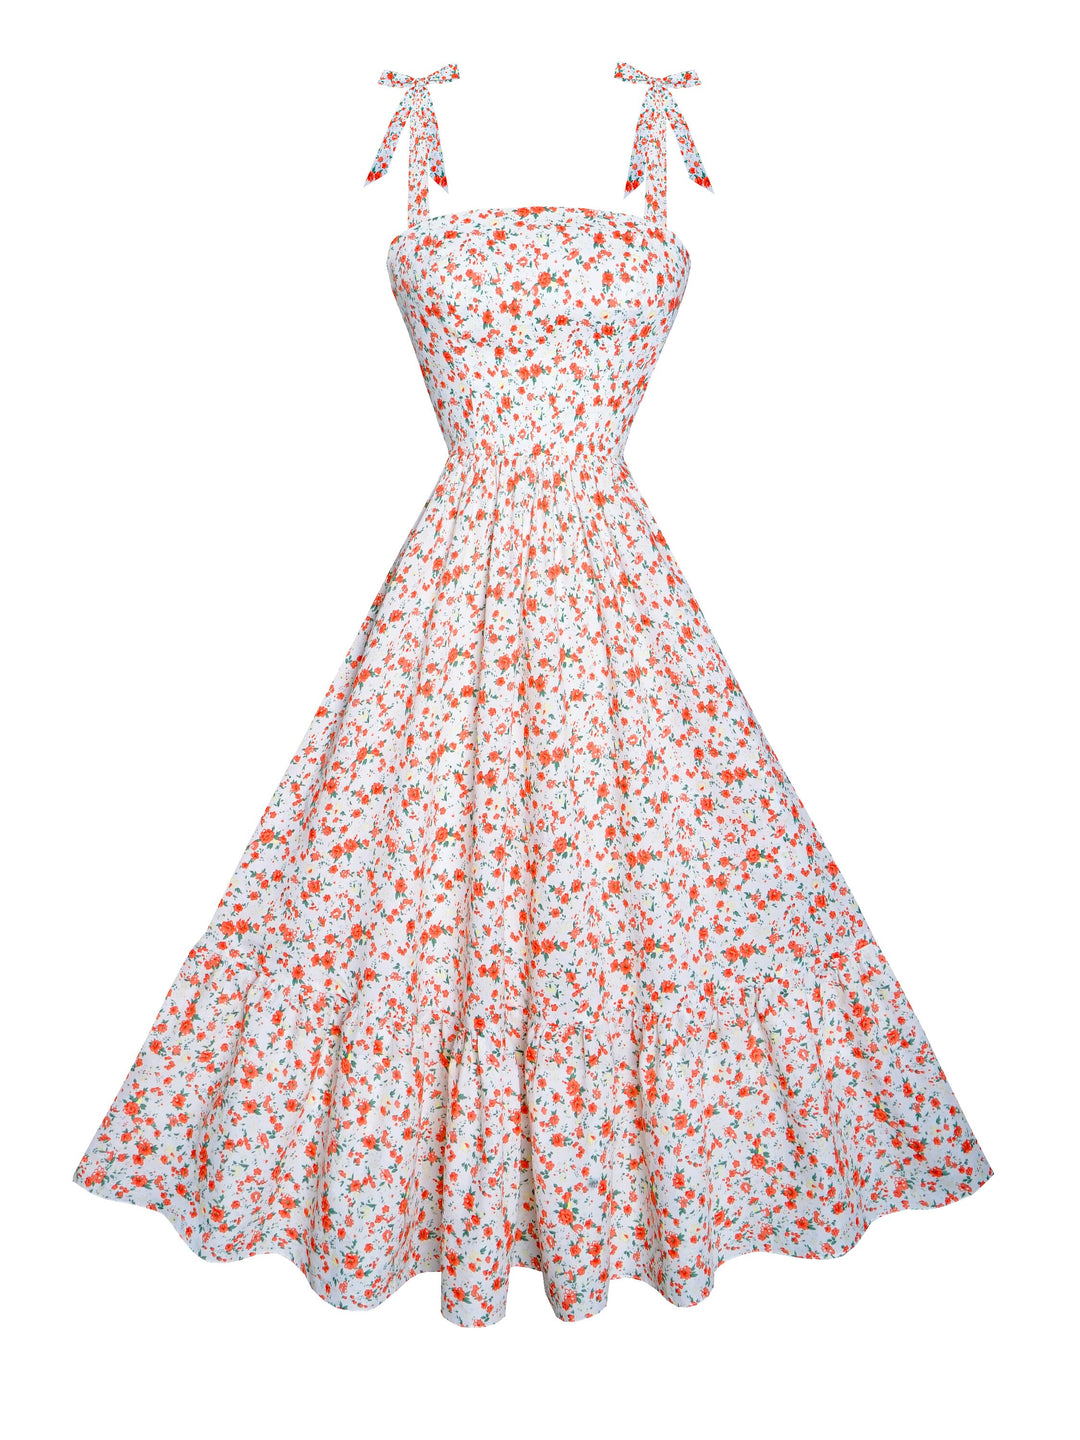 RTS - Size S - Chelsea Dress "Orange Blossom Special"